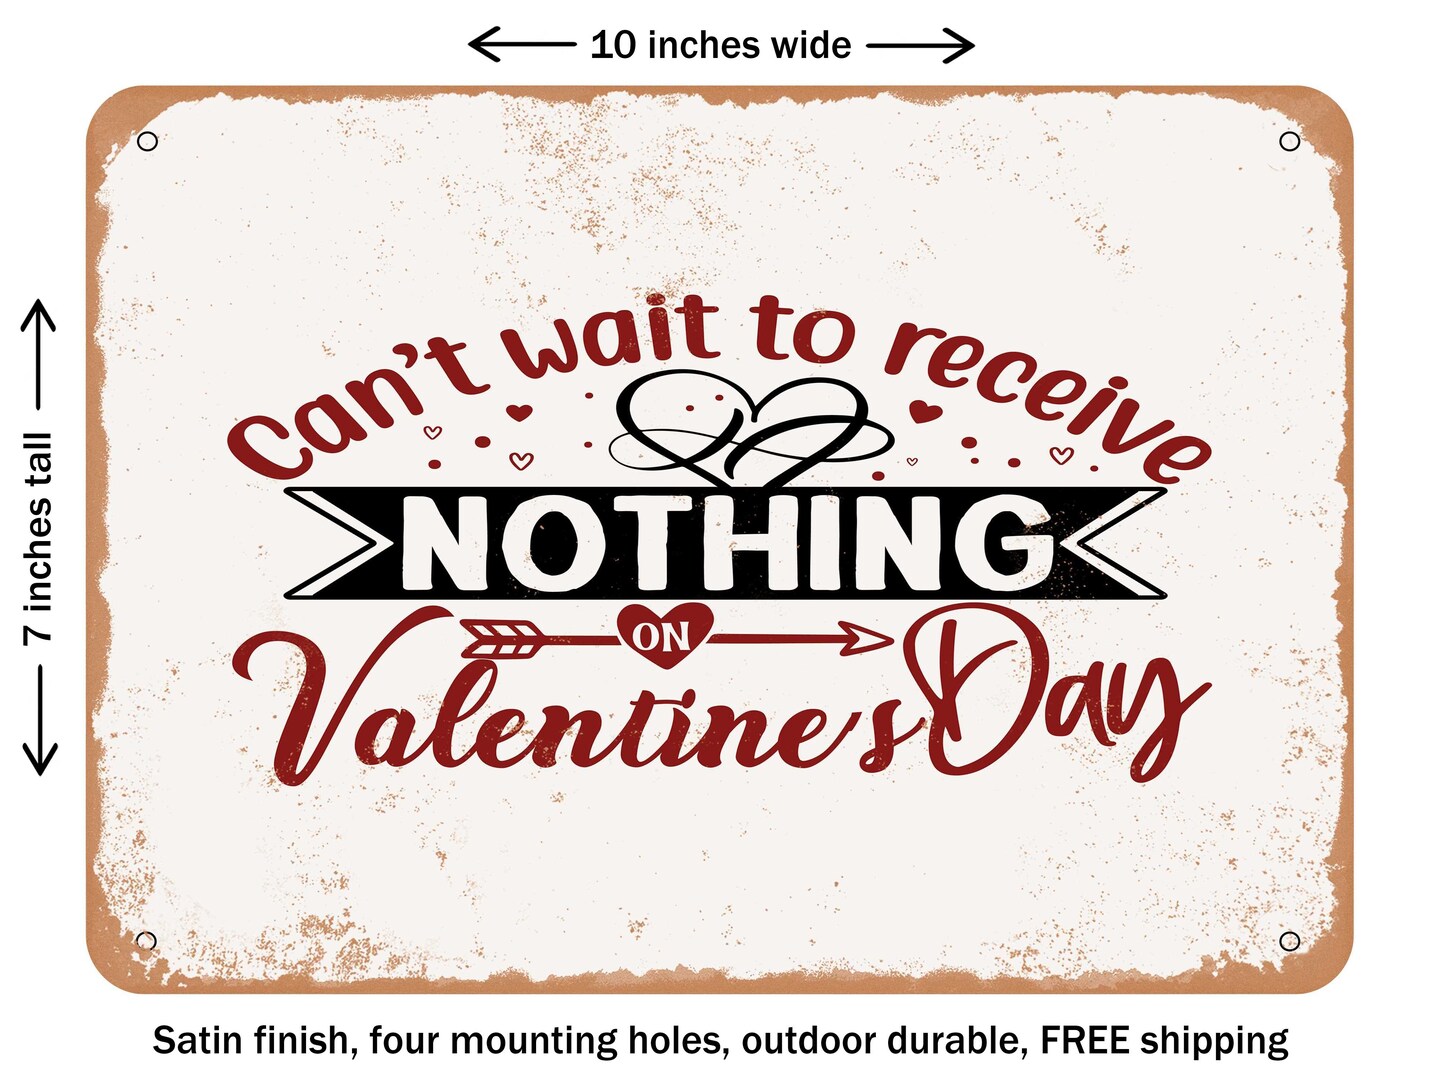 DECORATIVE METAL SIGN - Cant Wait to Receive Nothing On Valentines Day - 2 - Vintage Rusty Look